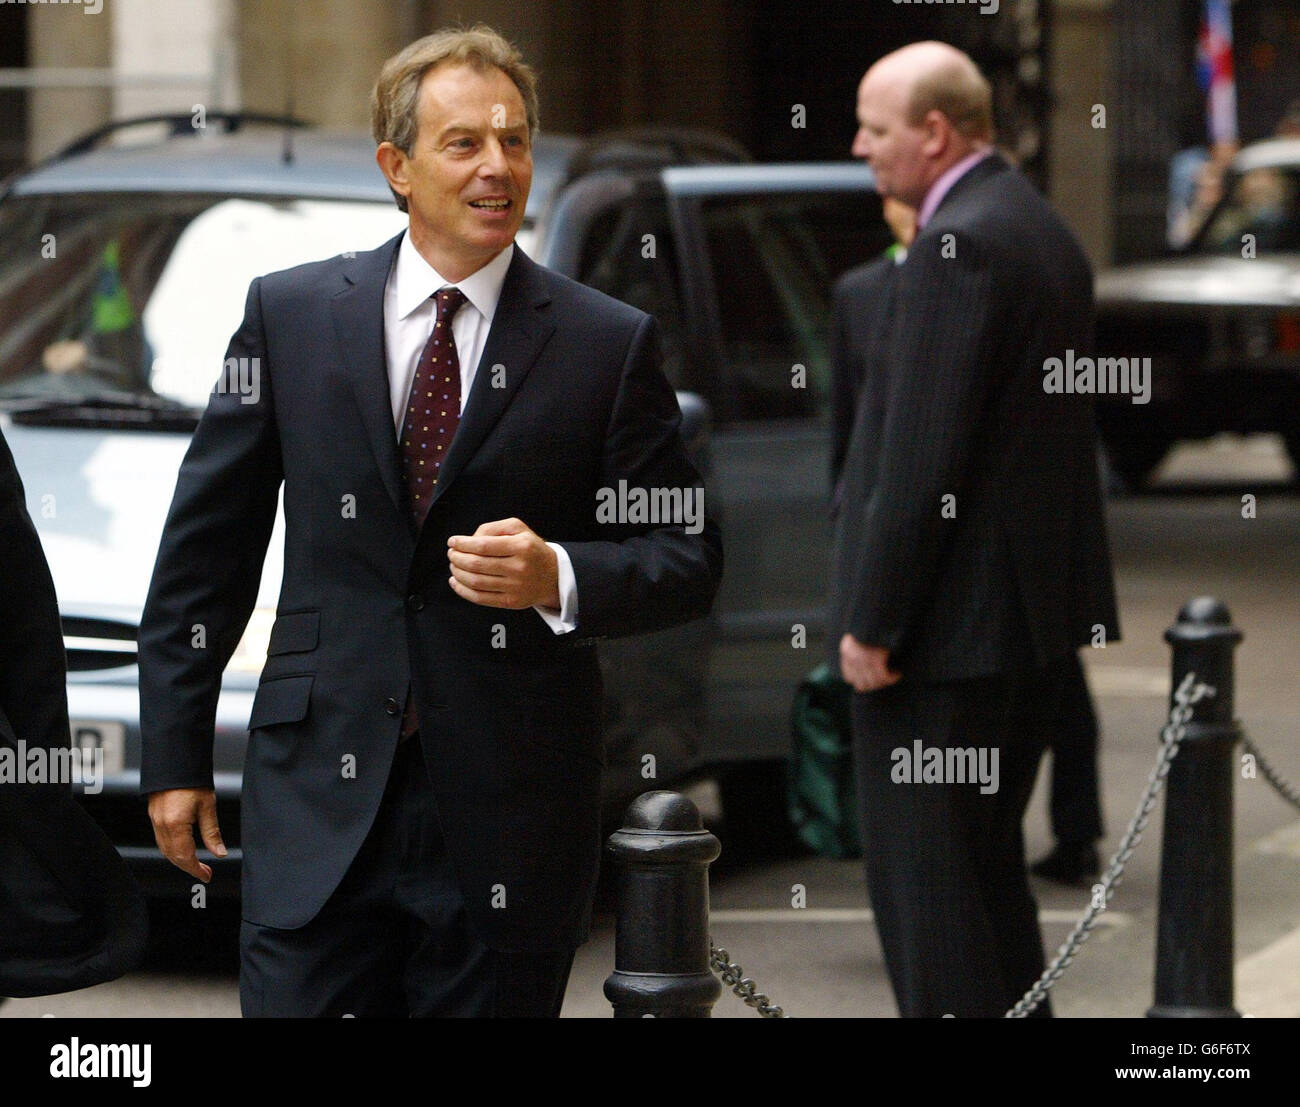 British Prime Minister Tony Blair arriving at the High Court in London to give evidence to the Hutton enquiry explaining his role in events leading up to the apparent suicide of Government weapons expert Dr David Kelly. The Hutton Inquiry was set up to investigate how Dr Kelly apparently came to take his own life after being identified as the likely source of a report by BBC Radio 4 Today programme`s defence correspondent Andrew Gilligan, in which the journalist suggested that the dossier was transformed at Downing Street`s behest. Stock Photo